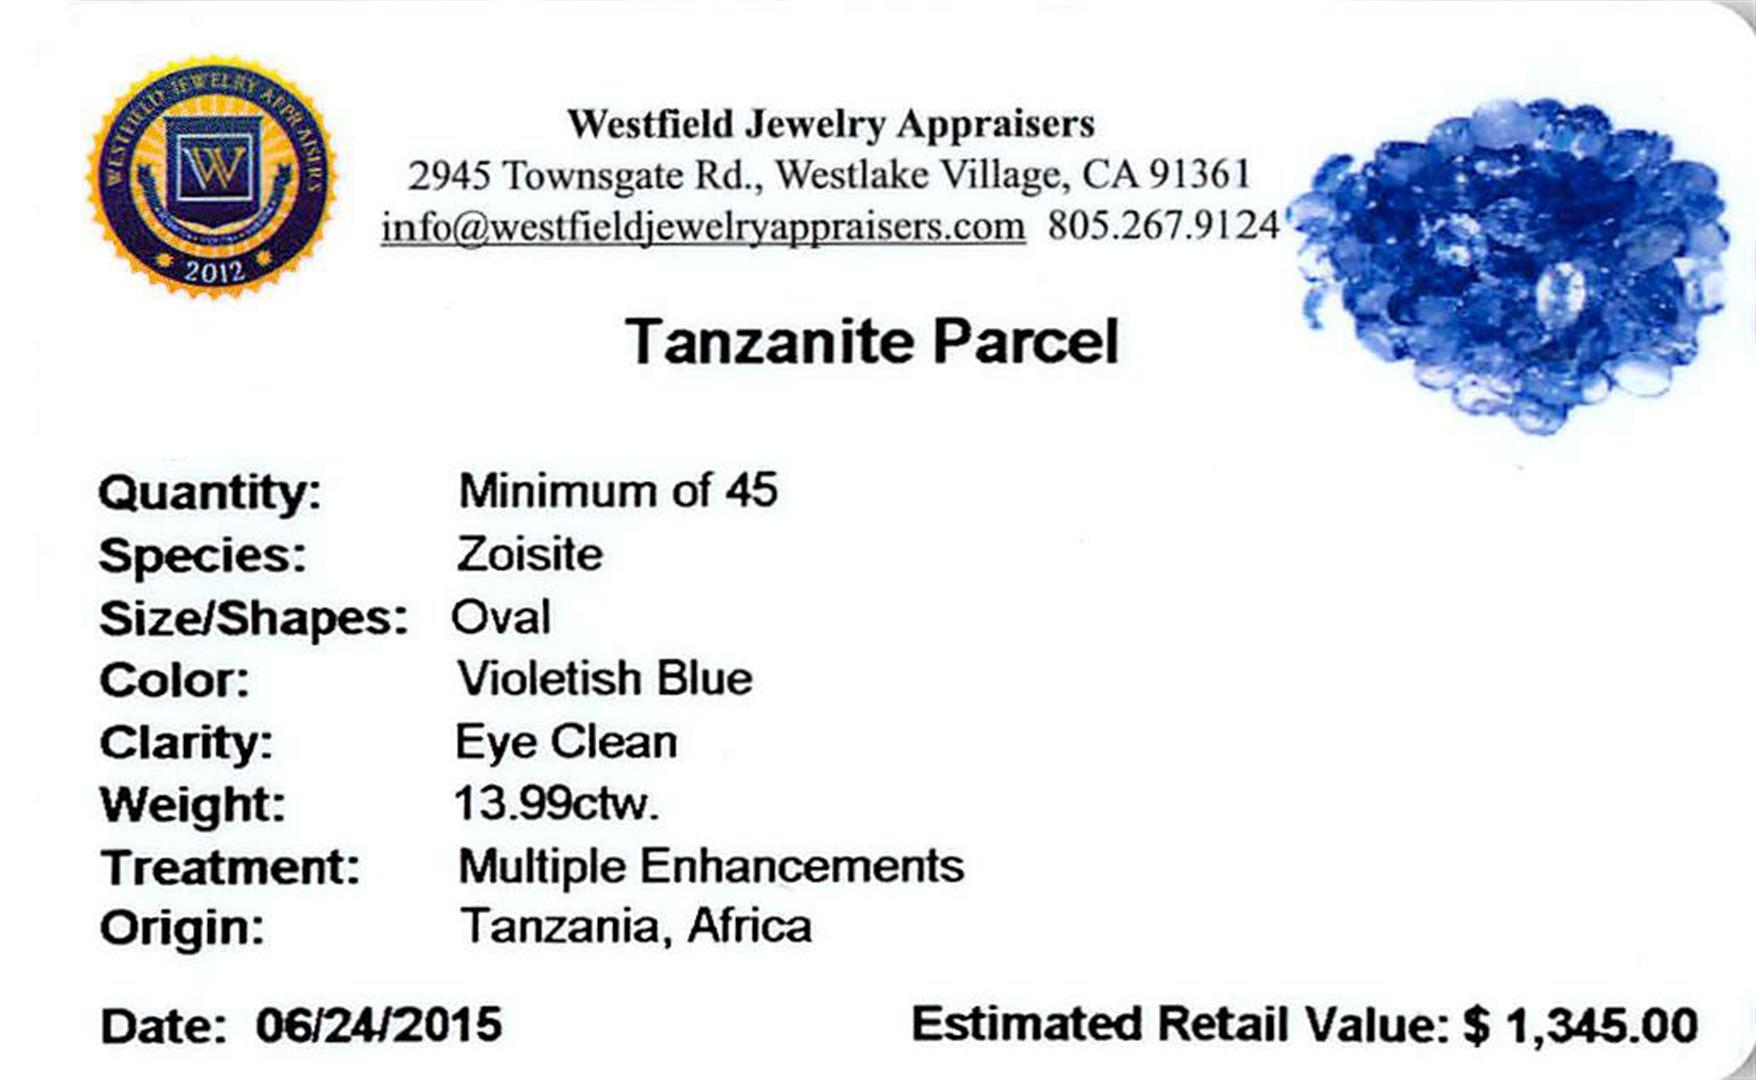 13.99 ctw Oval Mixed Tanzanite Parcel